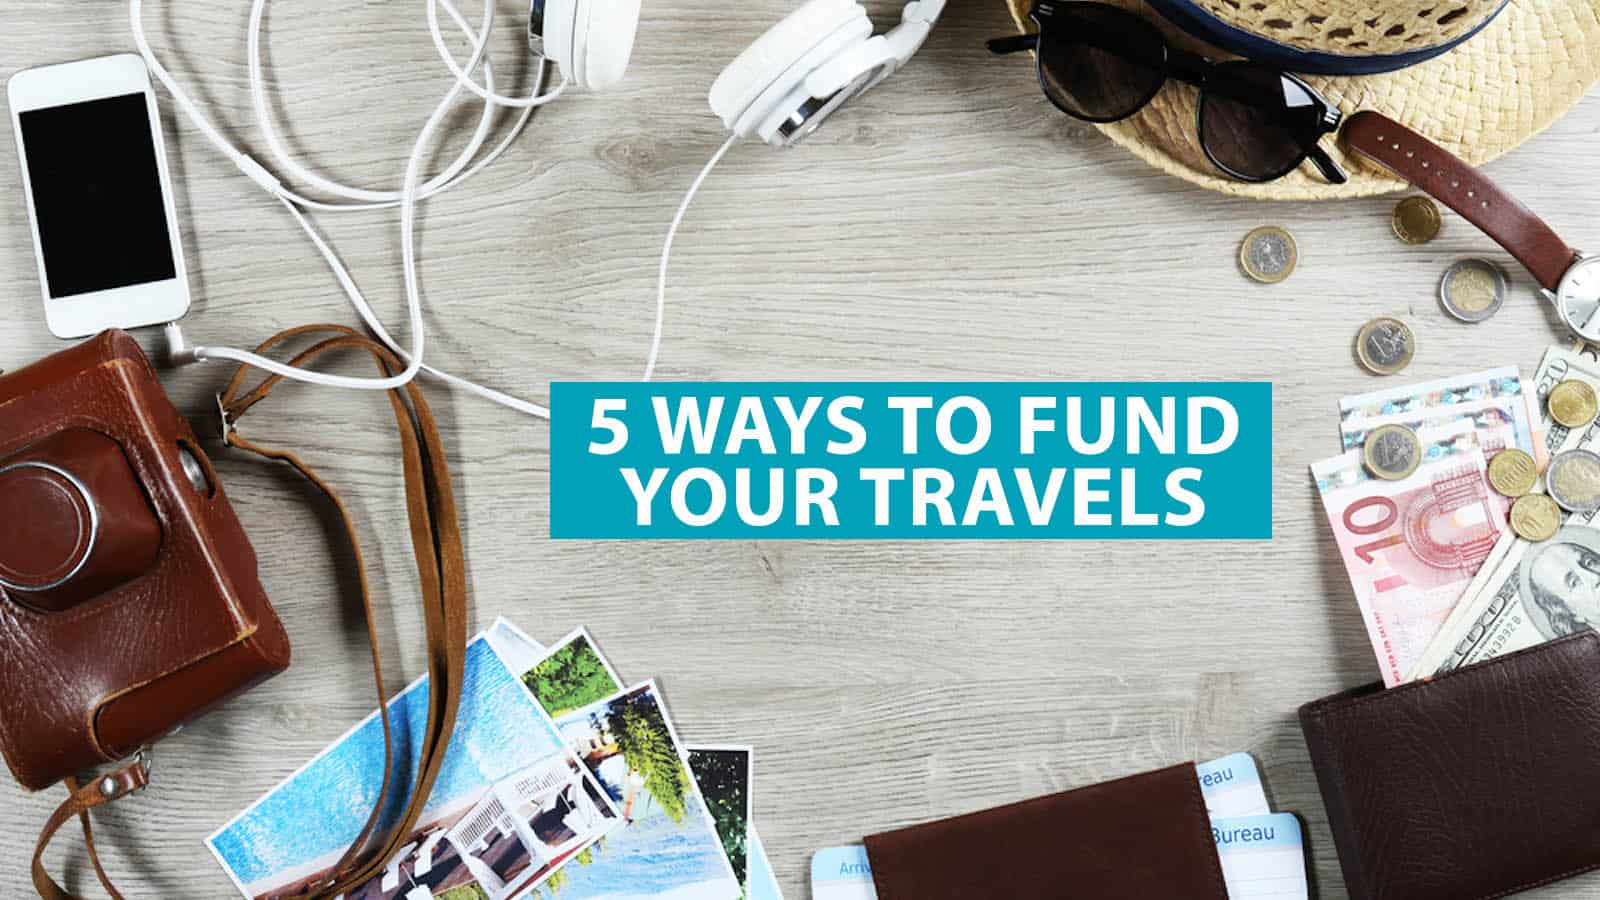 5 Ways to Fund Your Travels